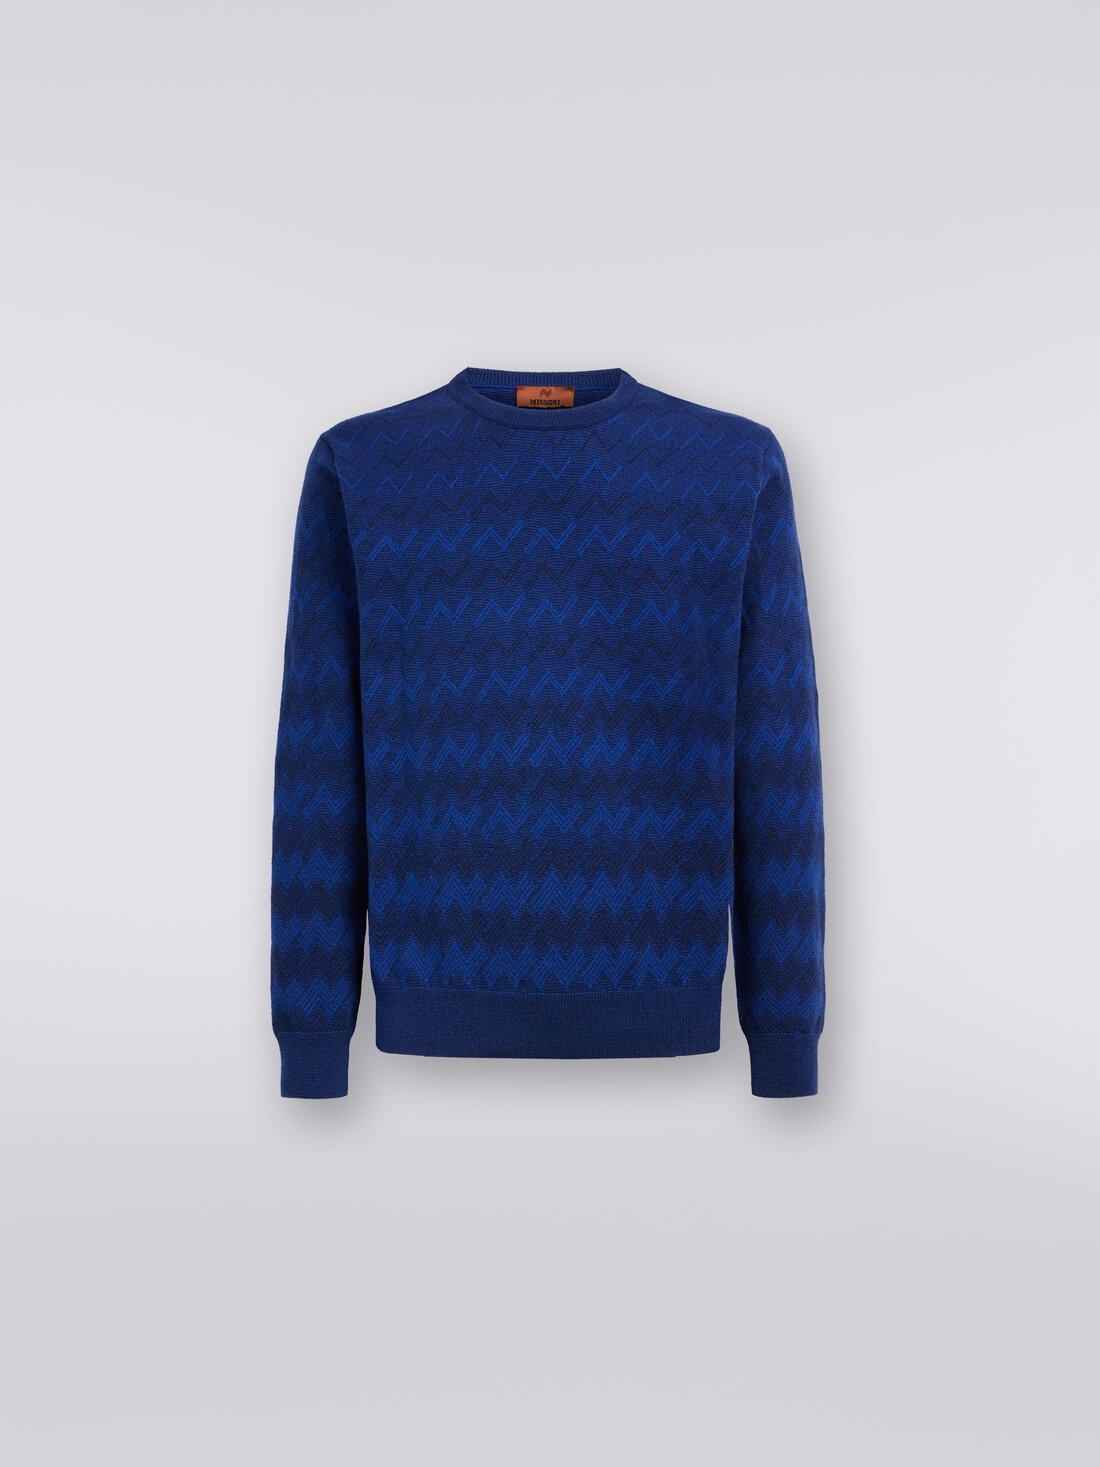 Cashmere crew-neck sweater with zigzags, Blue - US23WN0VBK033KS72CO - 0